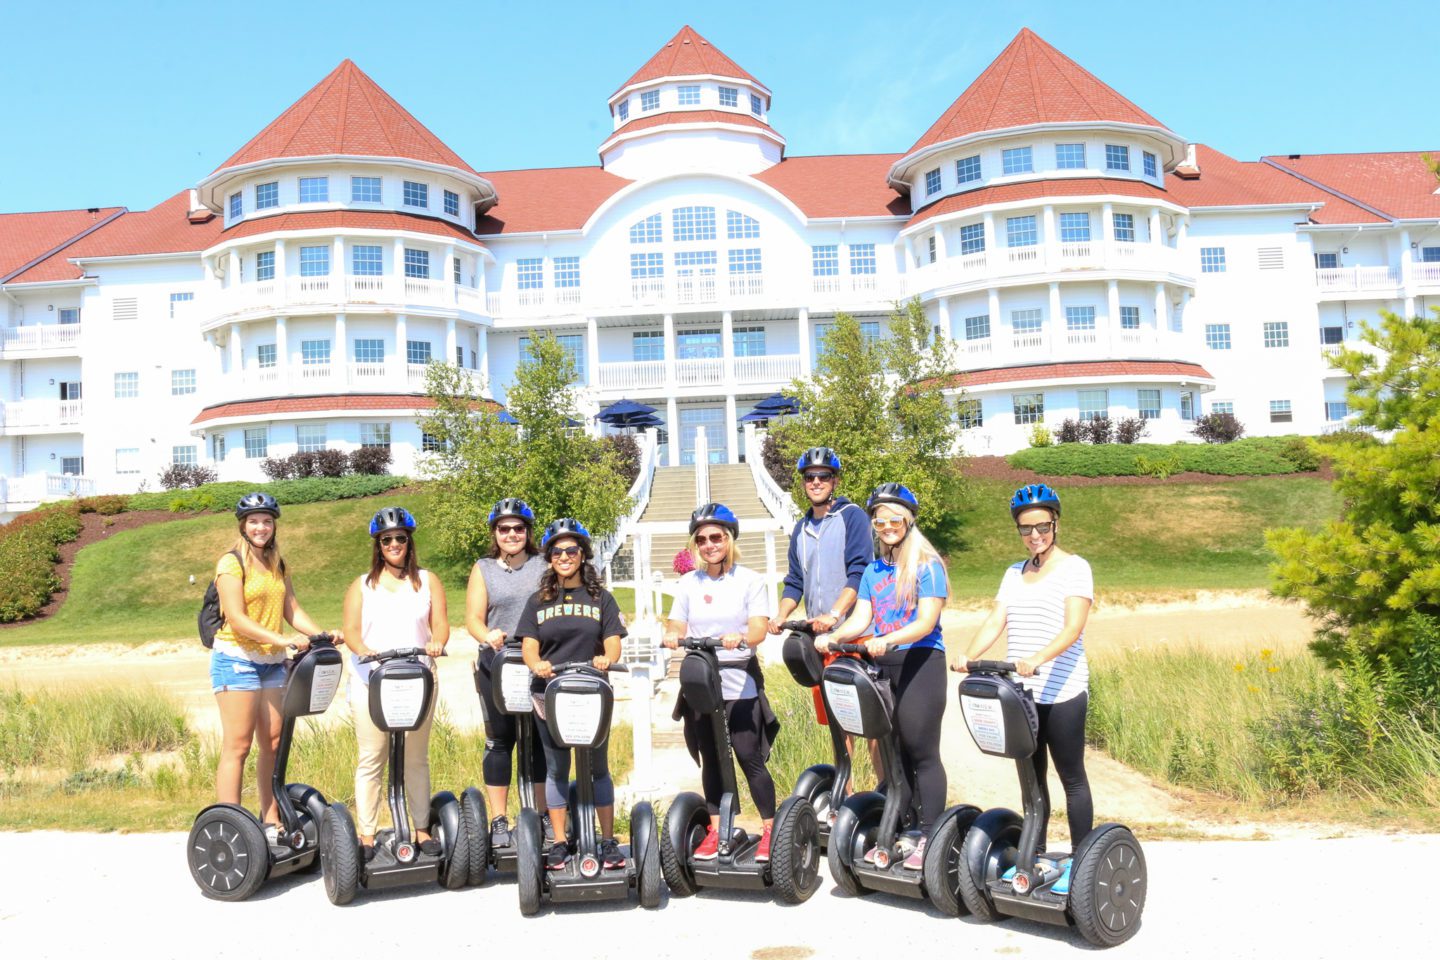 Making Headway on a Segway